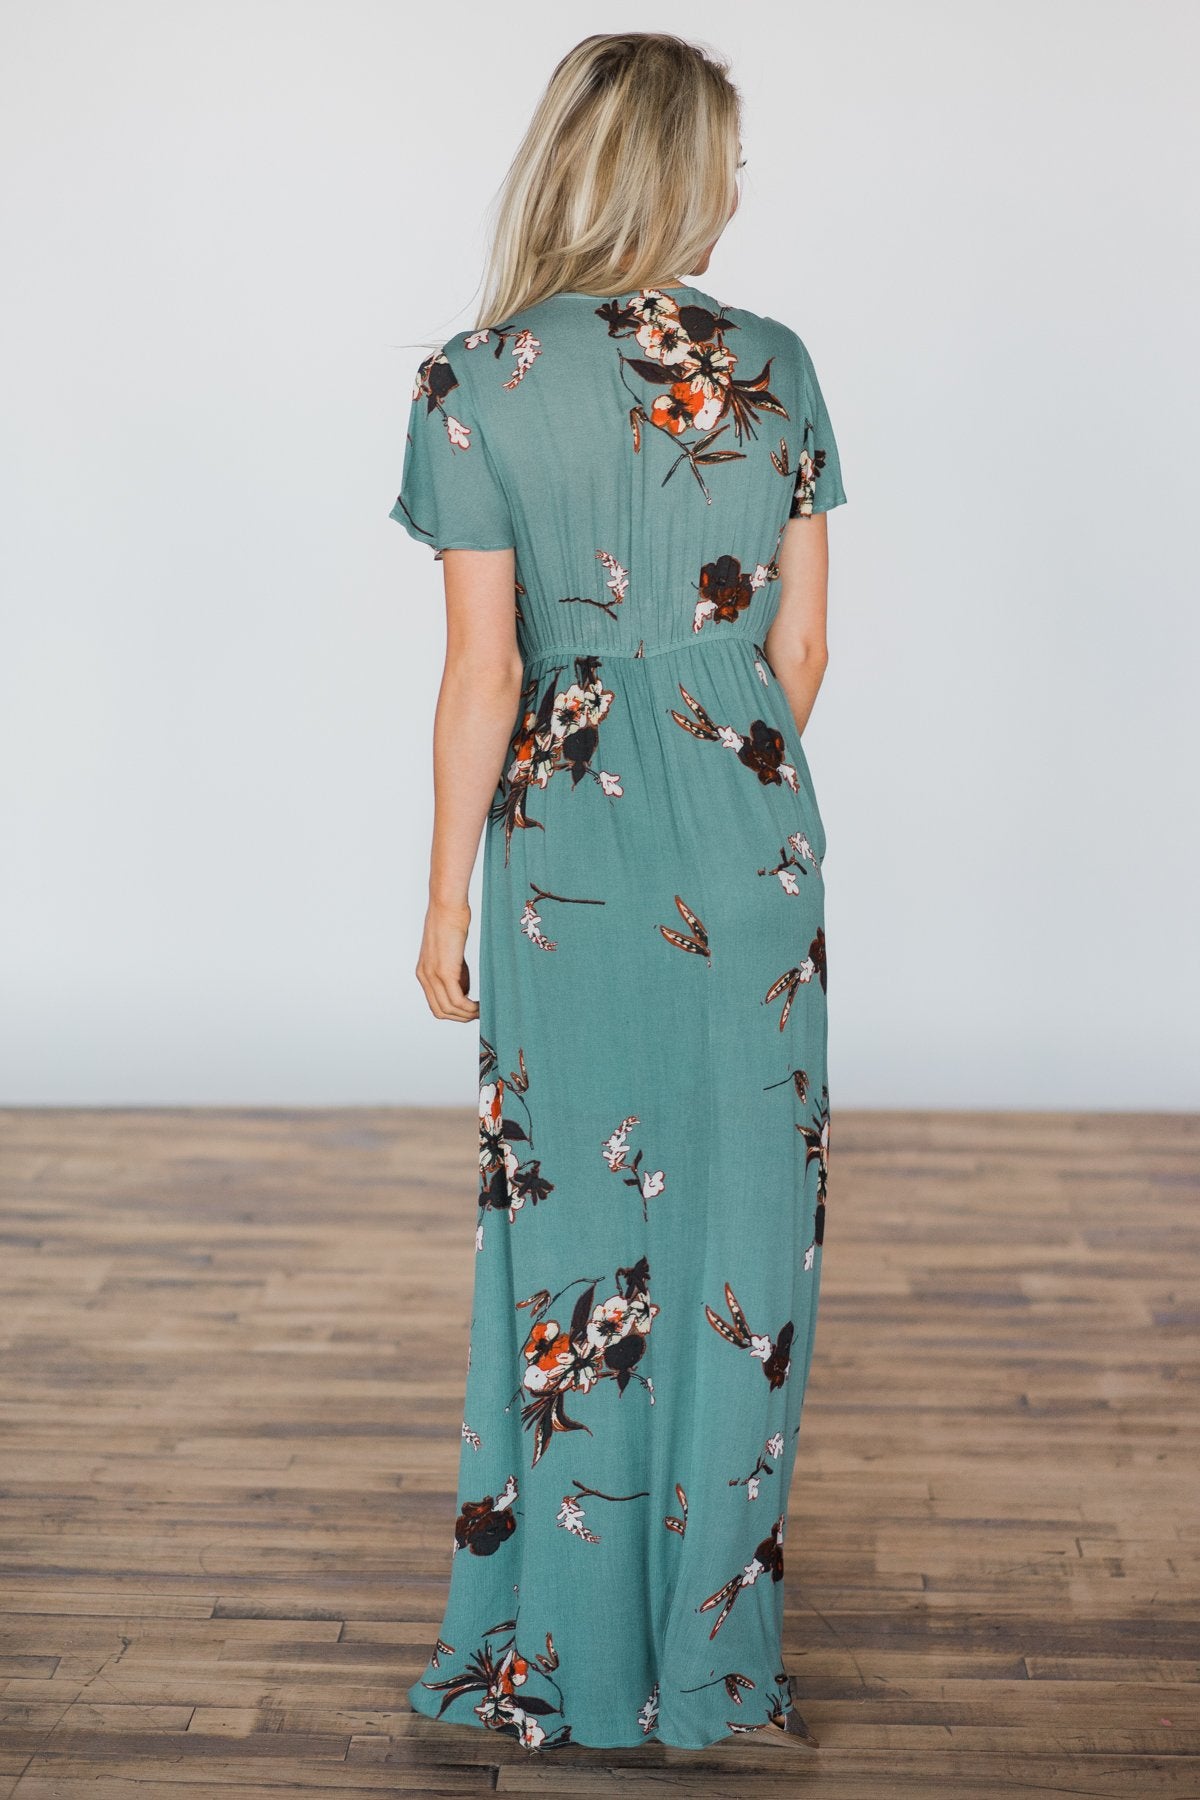 Dreaming of a New Day Floral Maxi Dress